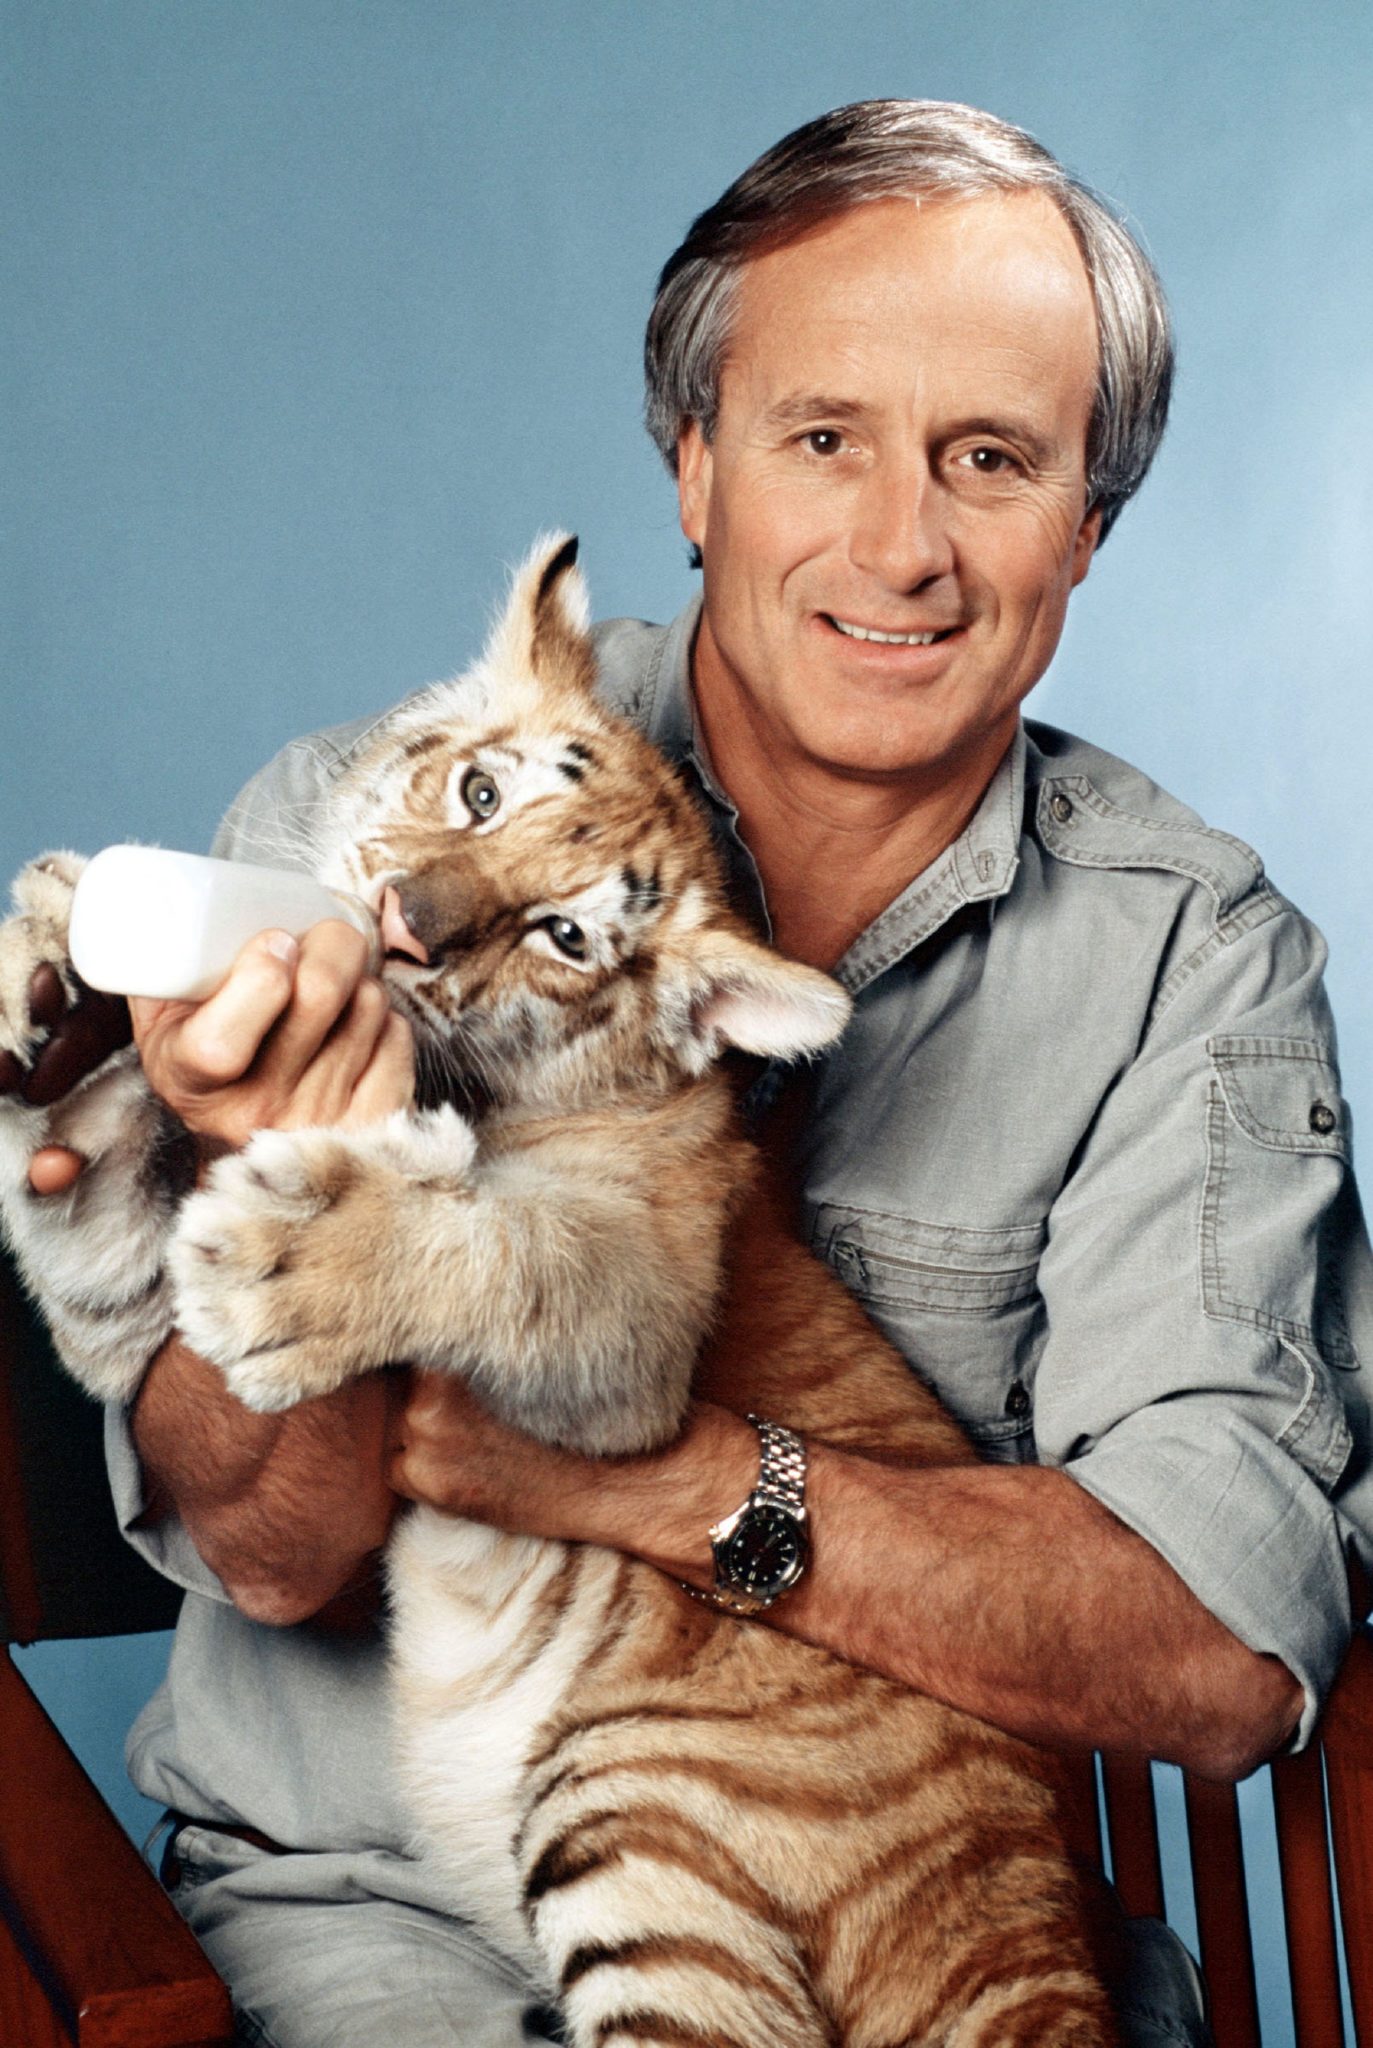 Fans React to Wildlife Expert Jack Hanna Stepping Away From Public Life